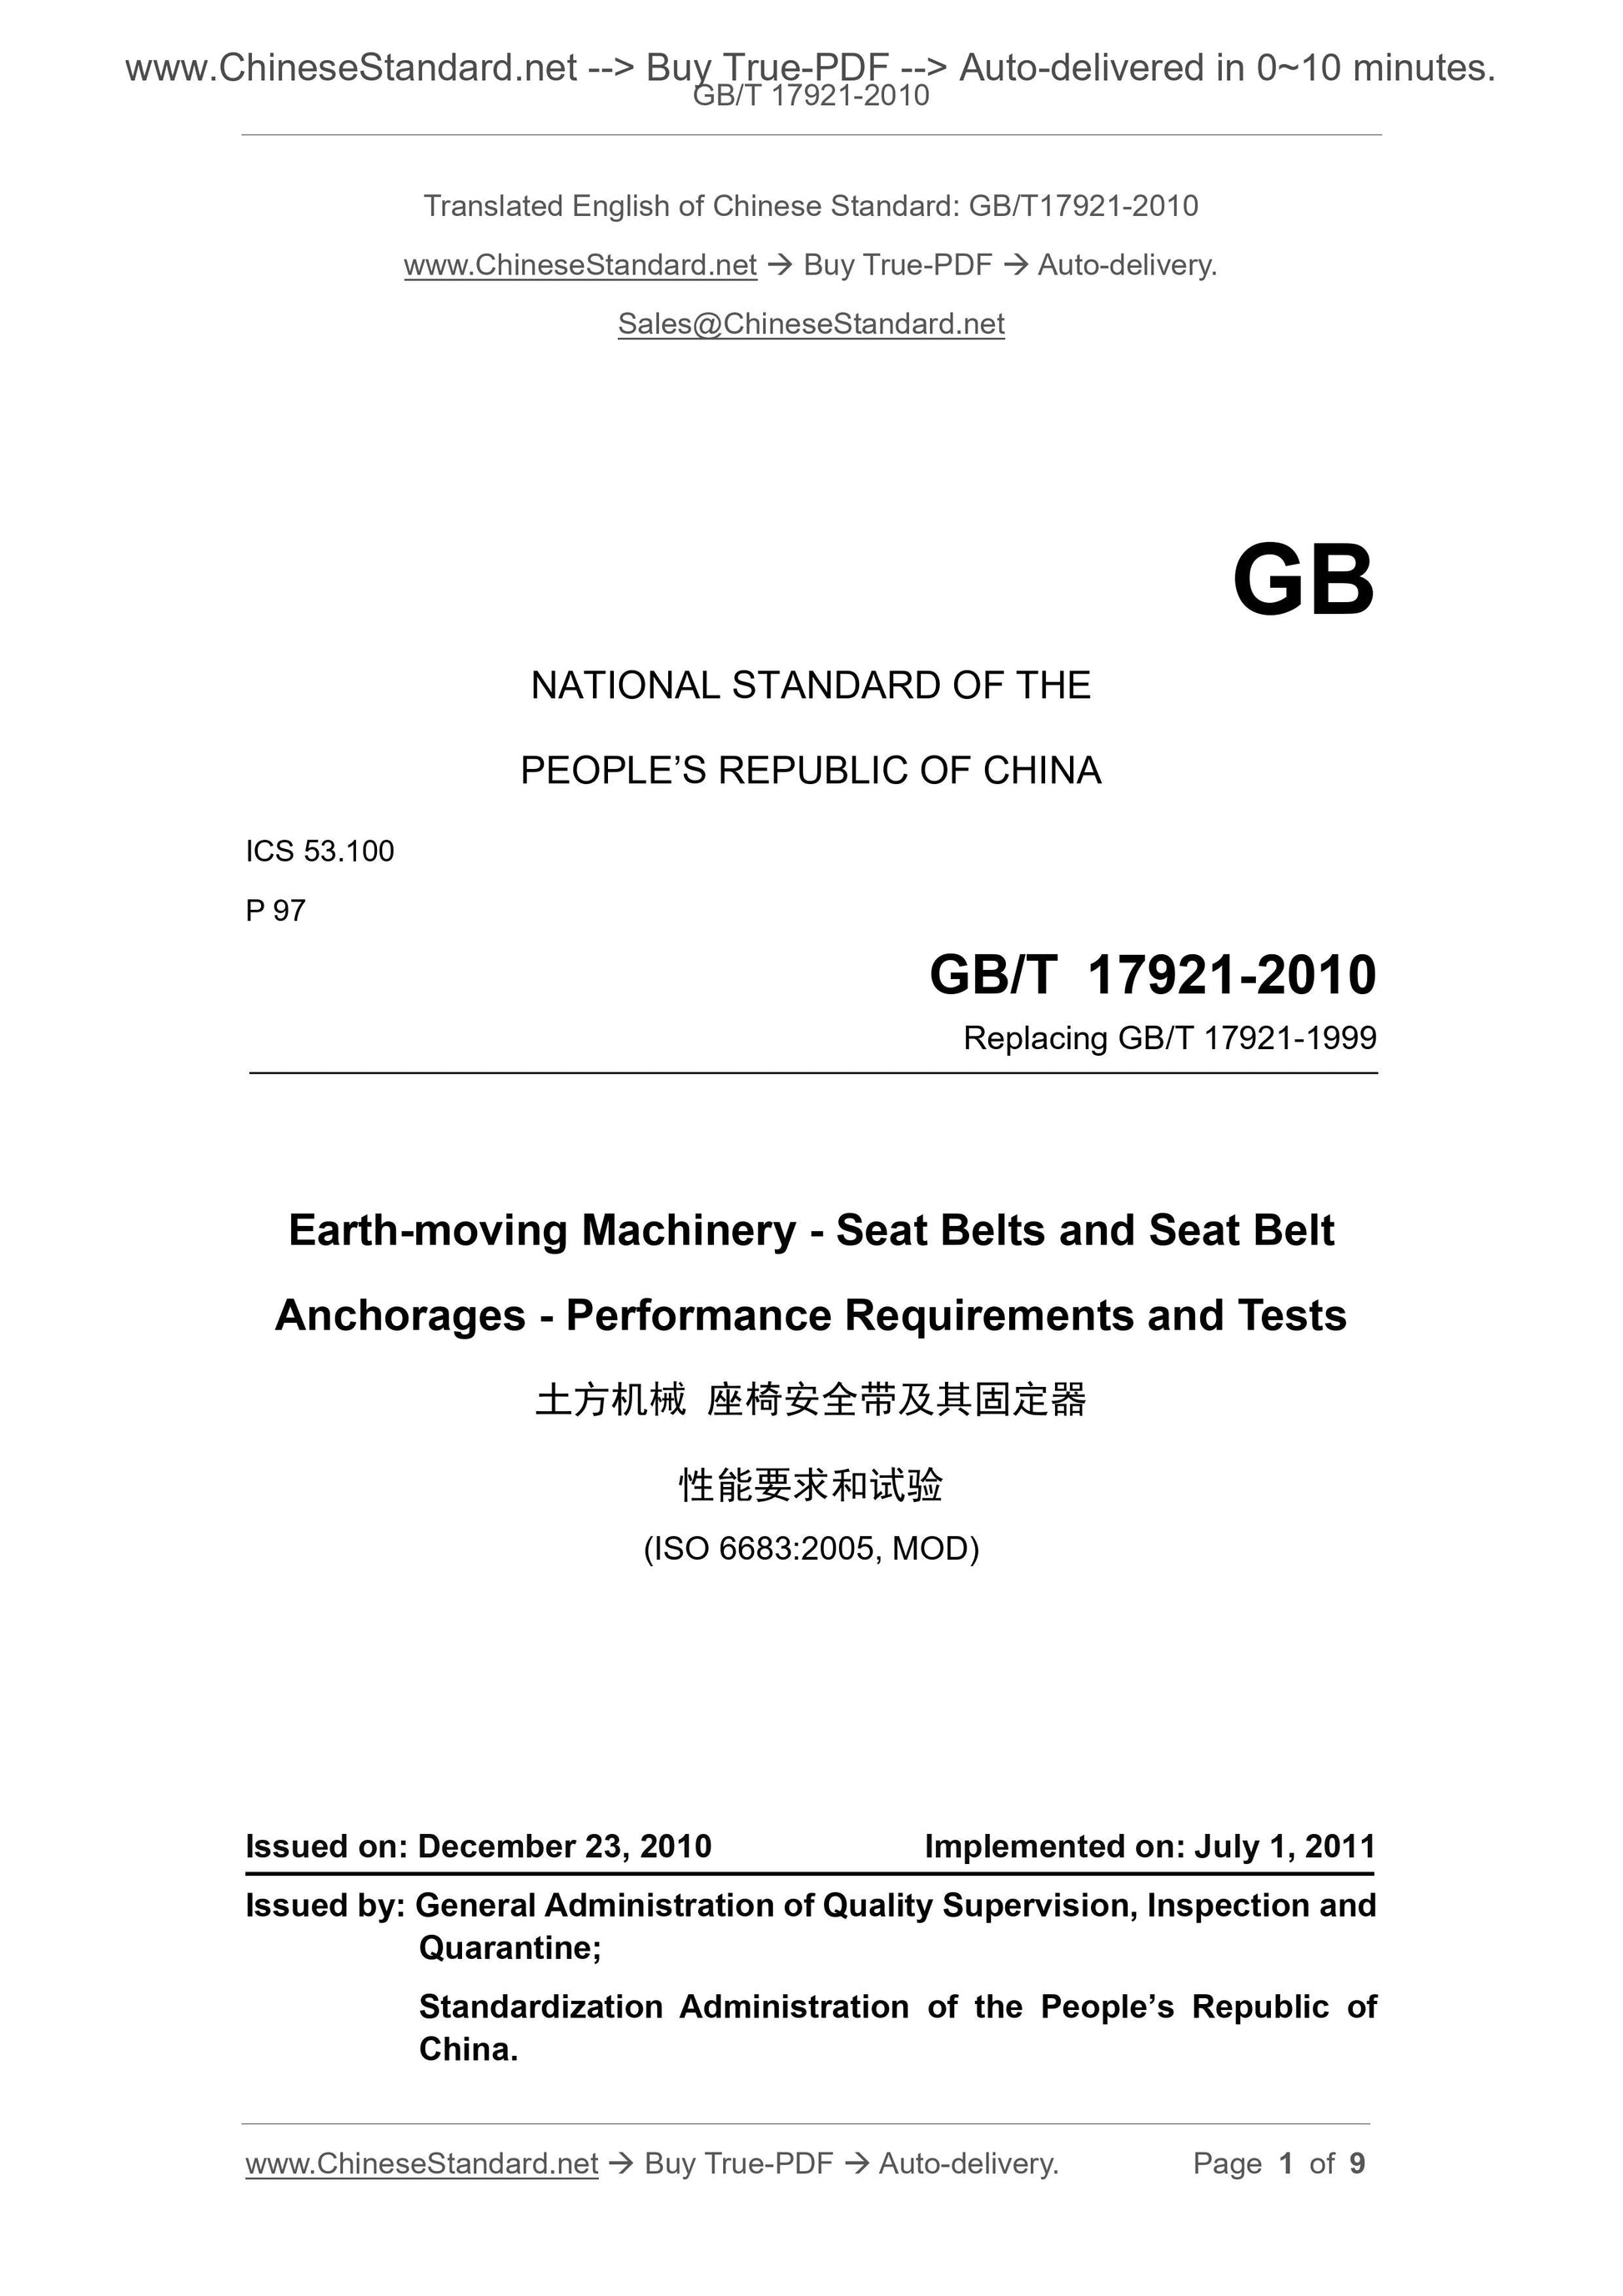 GB/T 17921-2010 Page 1